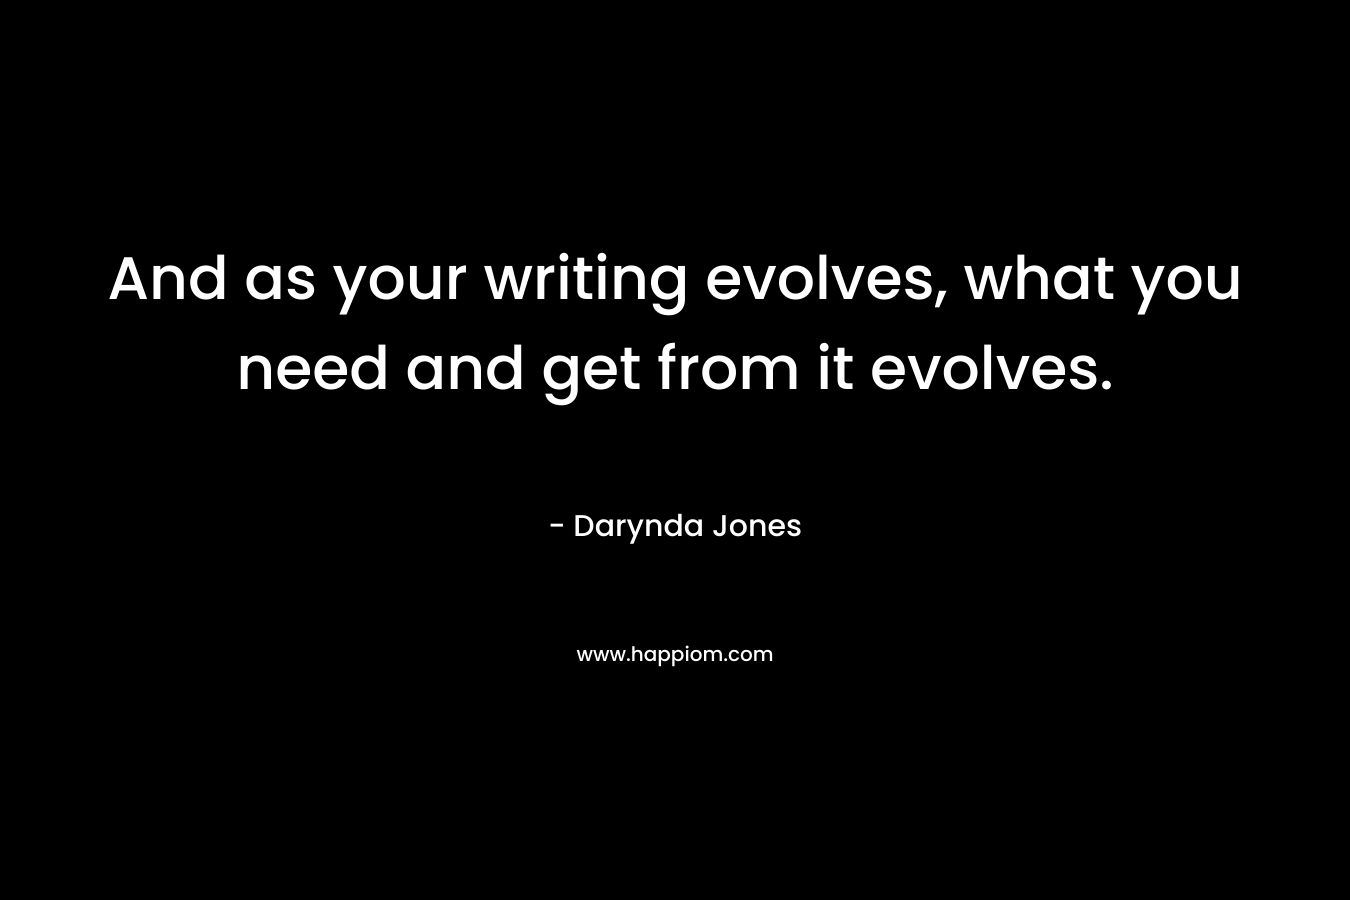 And as your writing evolves, what you need and get from it evolves. – Darynda Jones